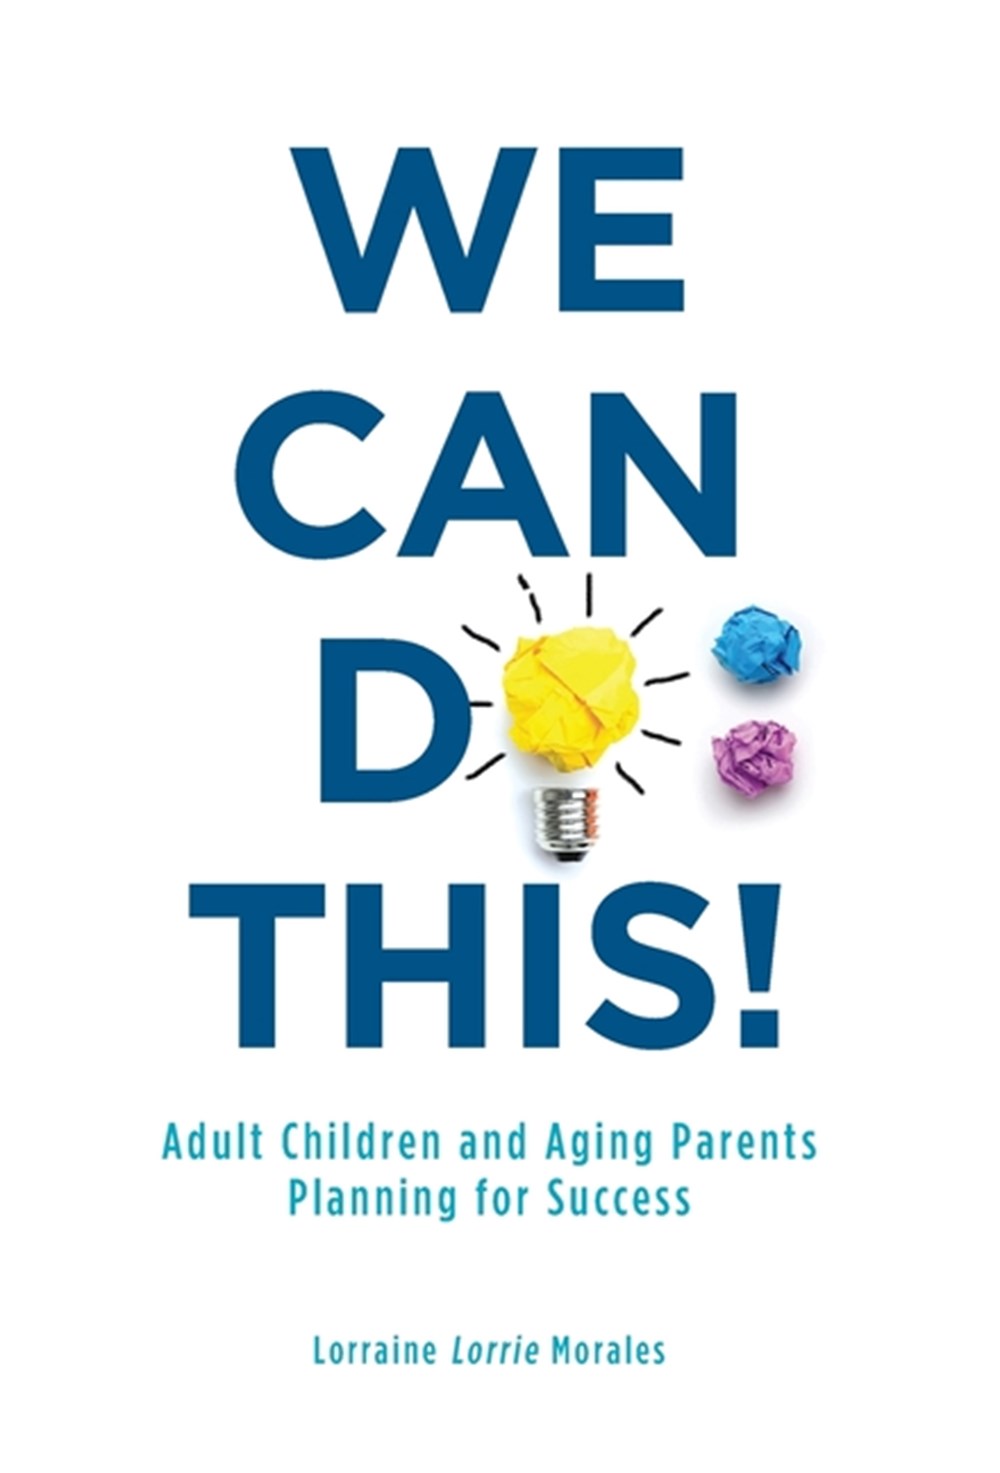 We Can Do This! Adult Children and Aging Parents Planning for Success